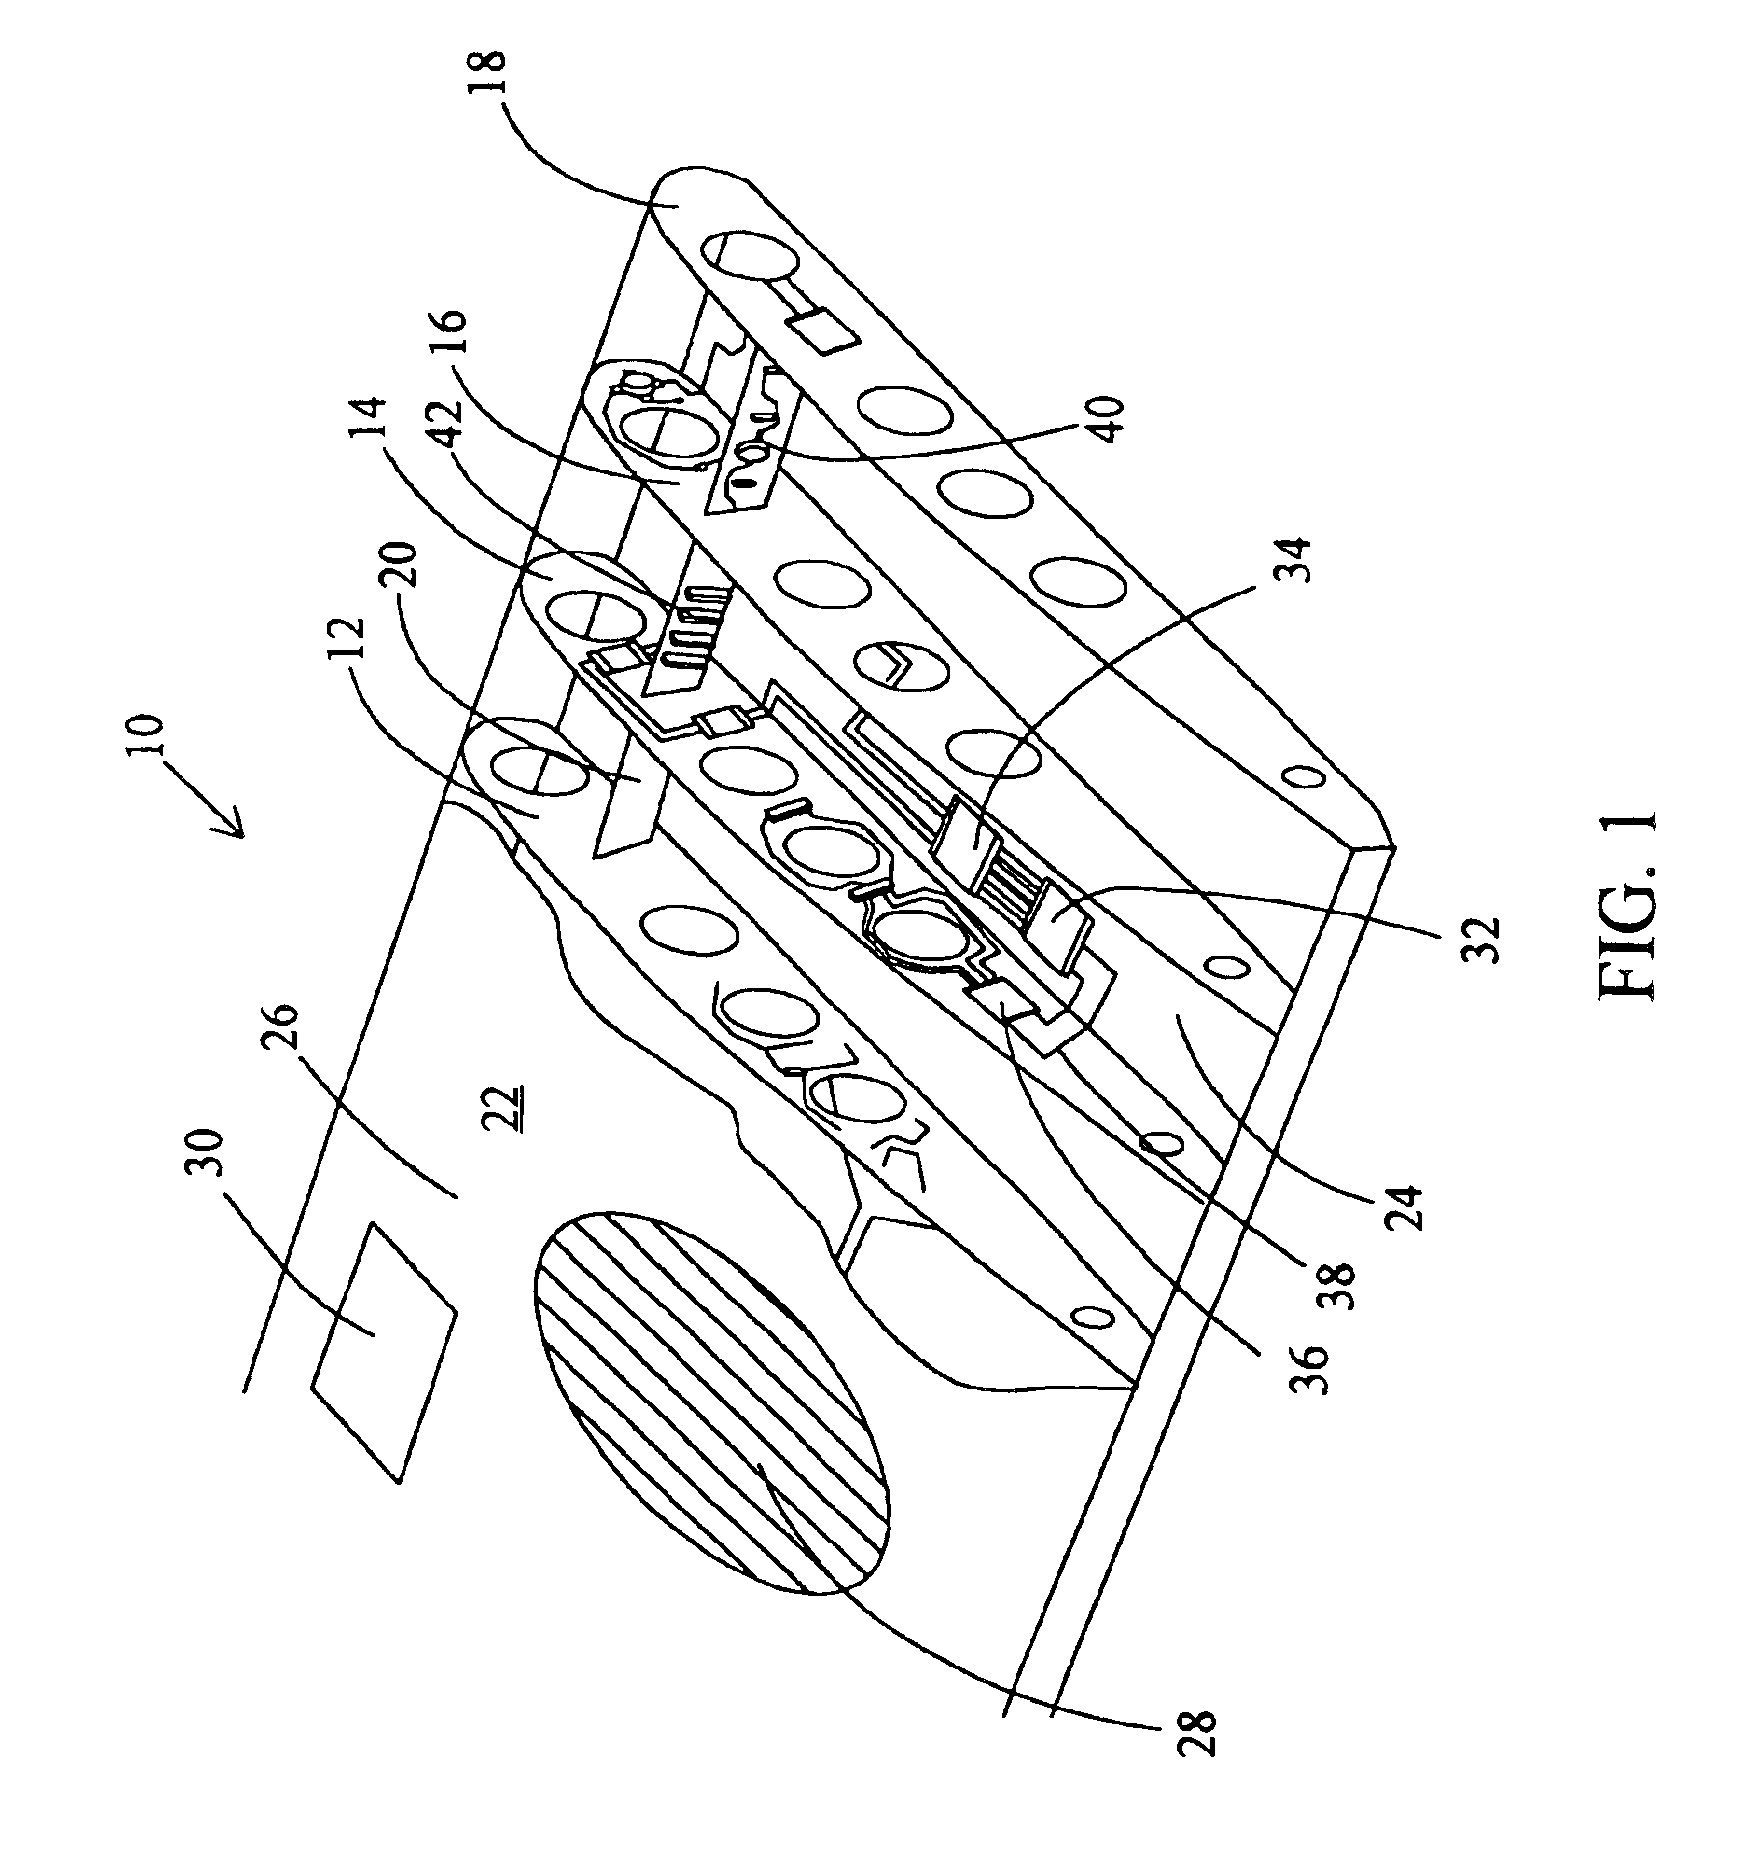 Unmanned aerial vehicle apparatus, system and method for retrieving data